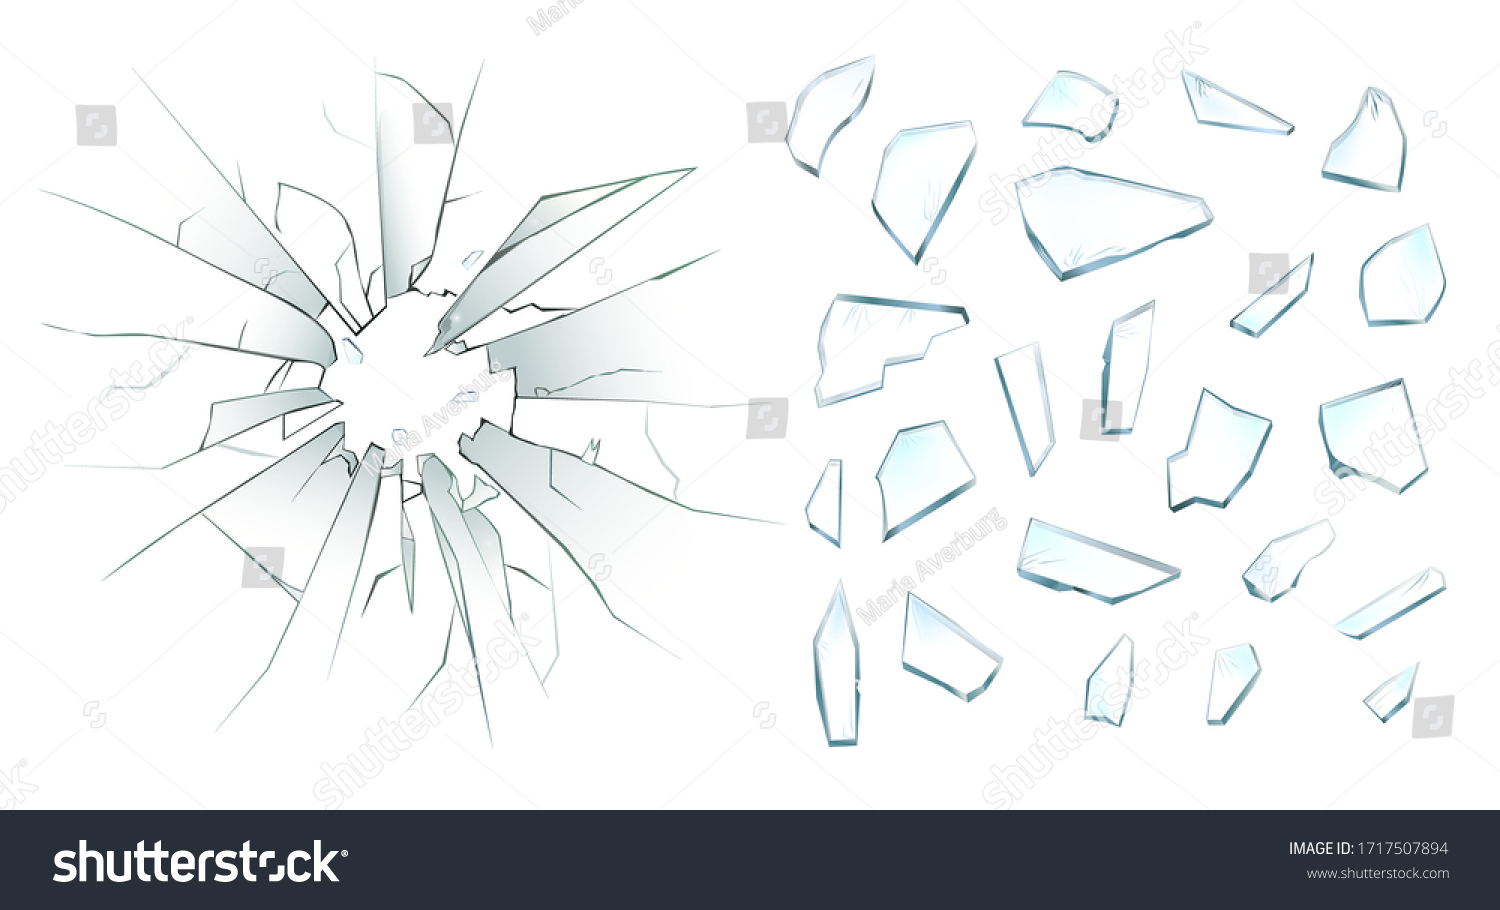 SVG of High detailed realistic broken glass isolated on transparent background. With cracks and bullet marks. Realistic transparent shards of broken glass. Vector illustration. svg